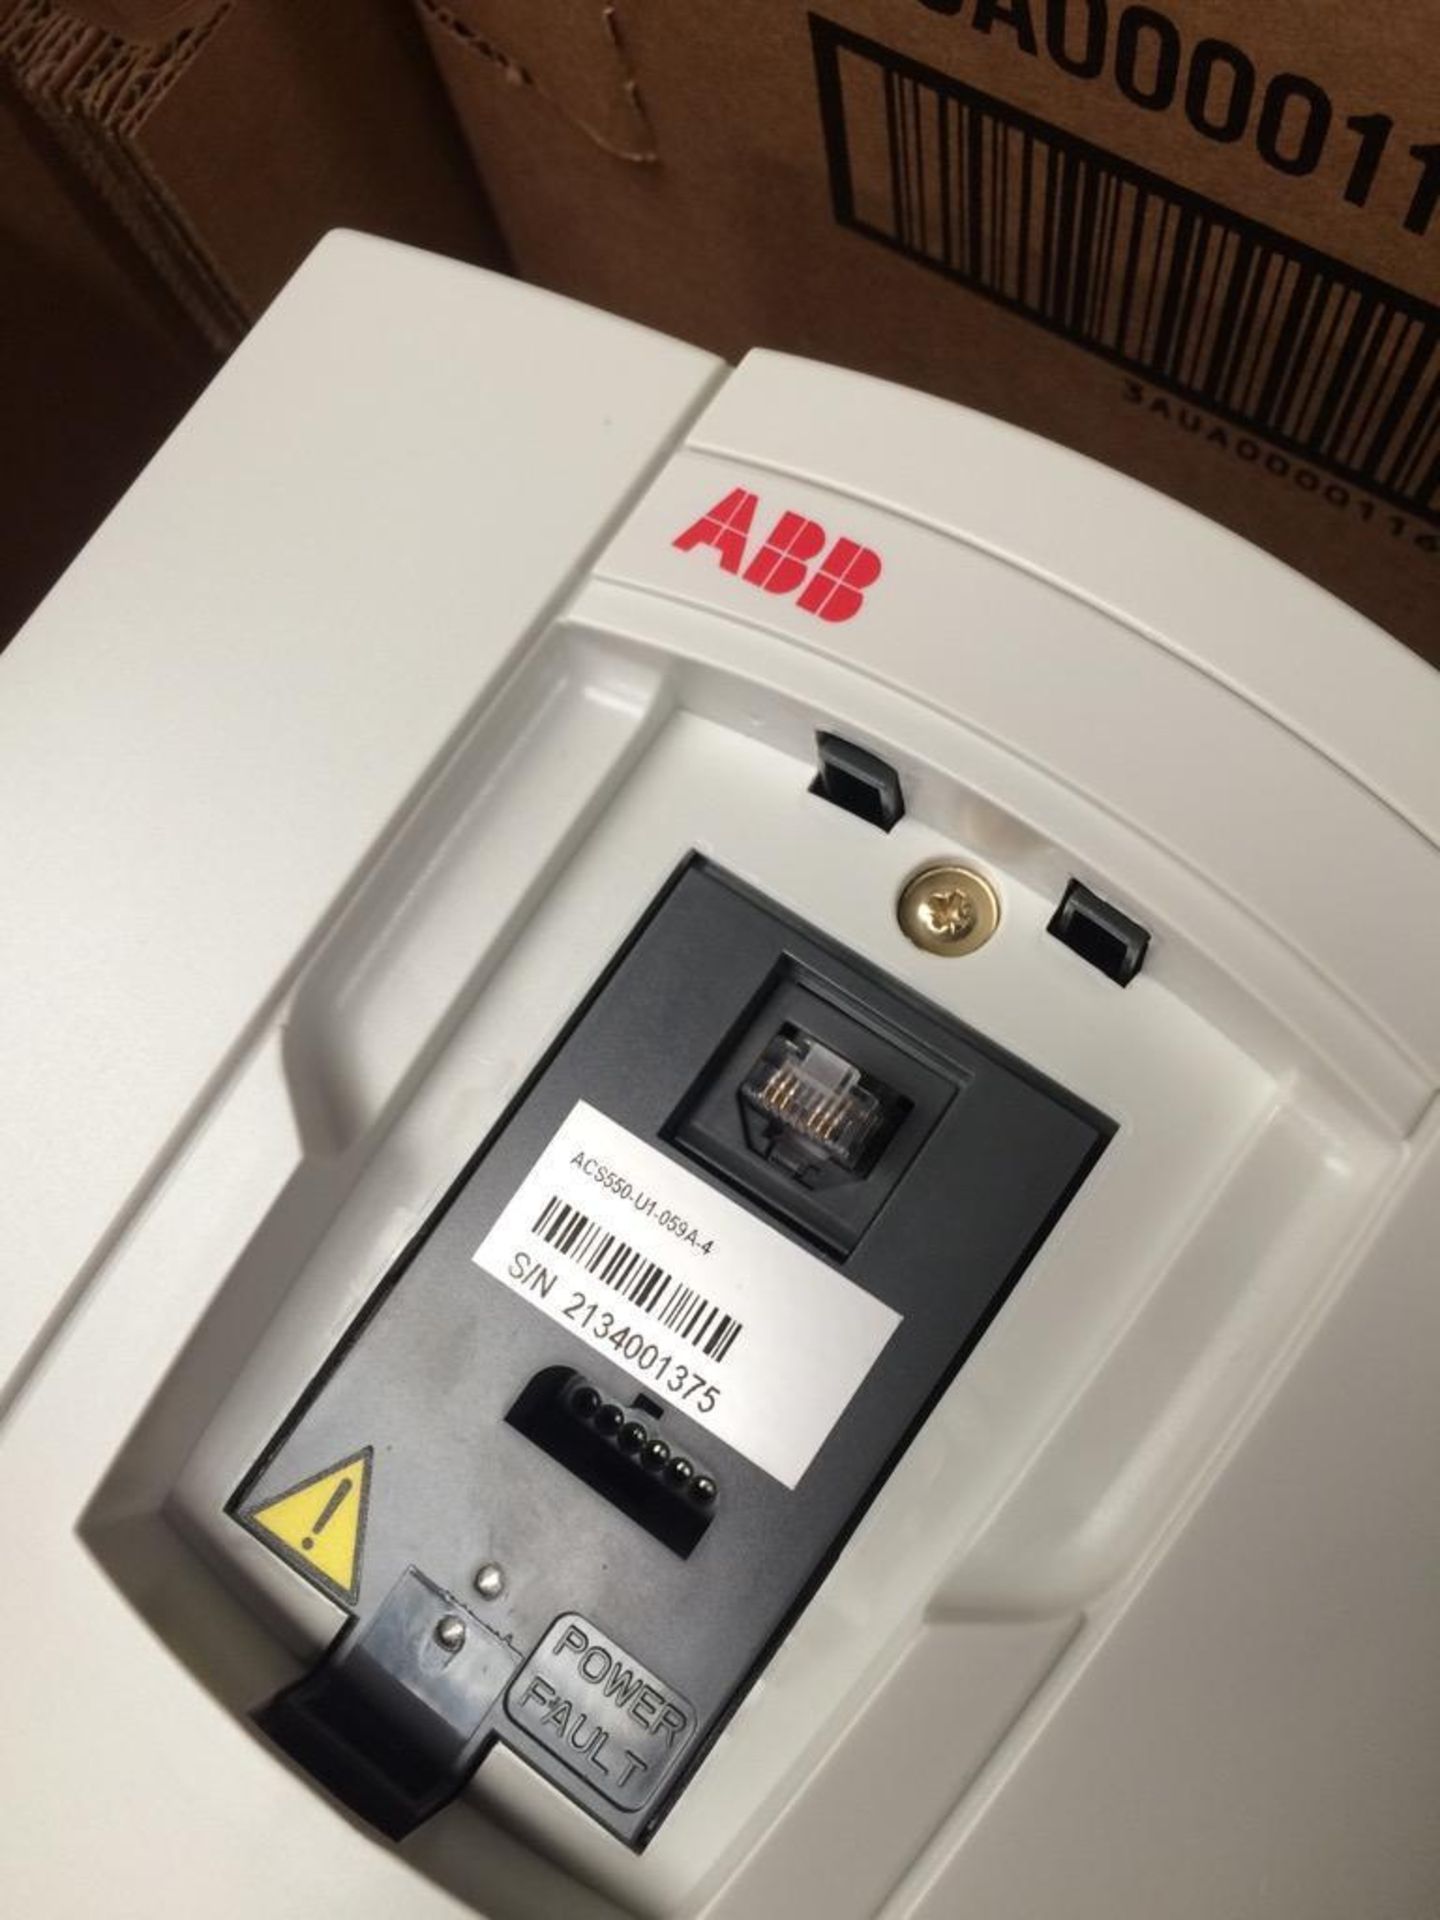 New In Box ABB Model ACS550-01-059A-4 40HP 30KW VFD Variable Frequency Drive. Serial Number 21340013 - Image 3 of 10